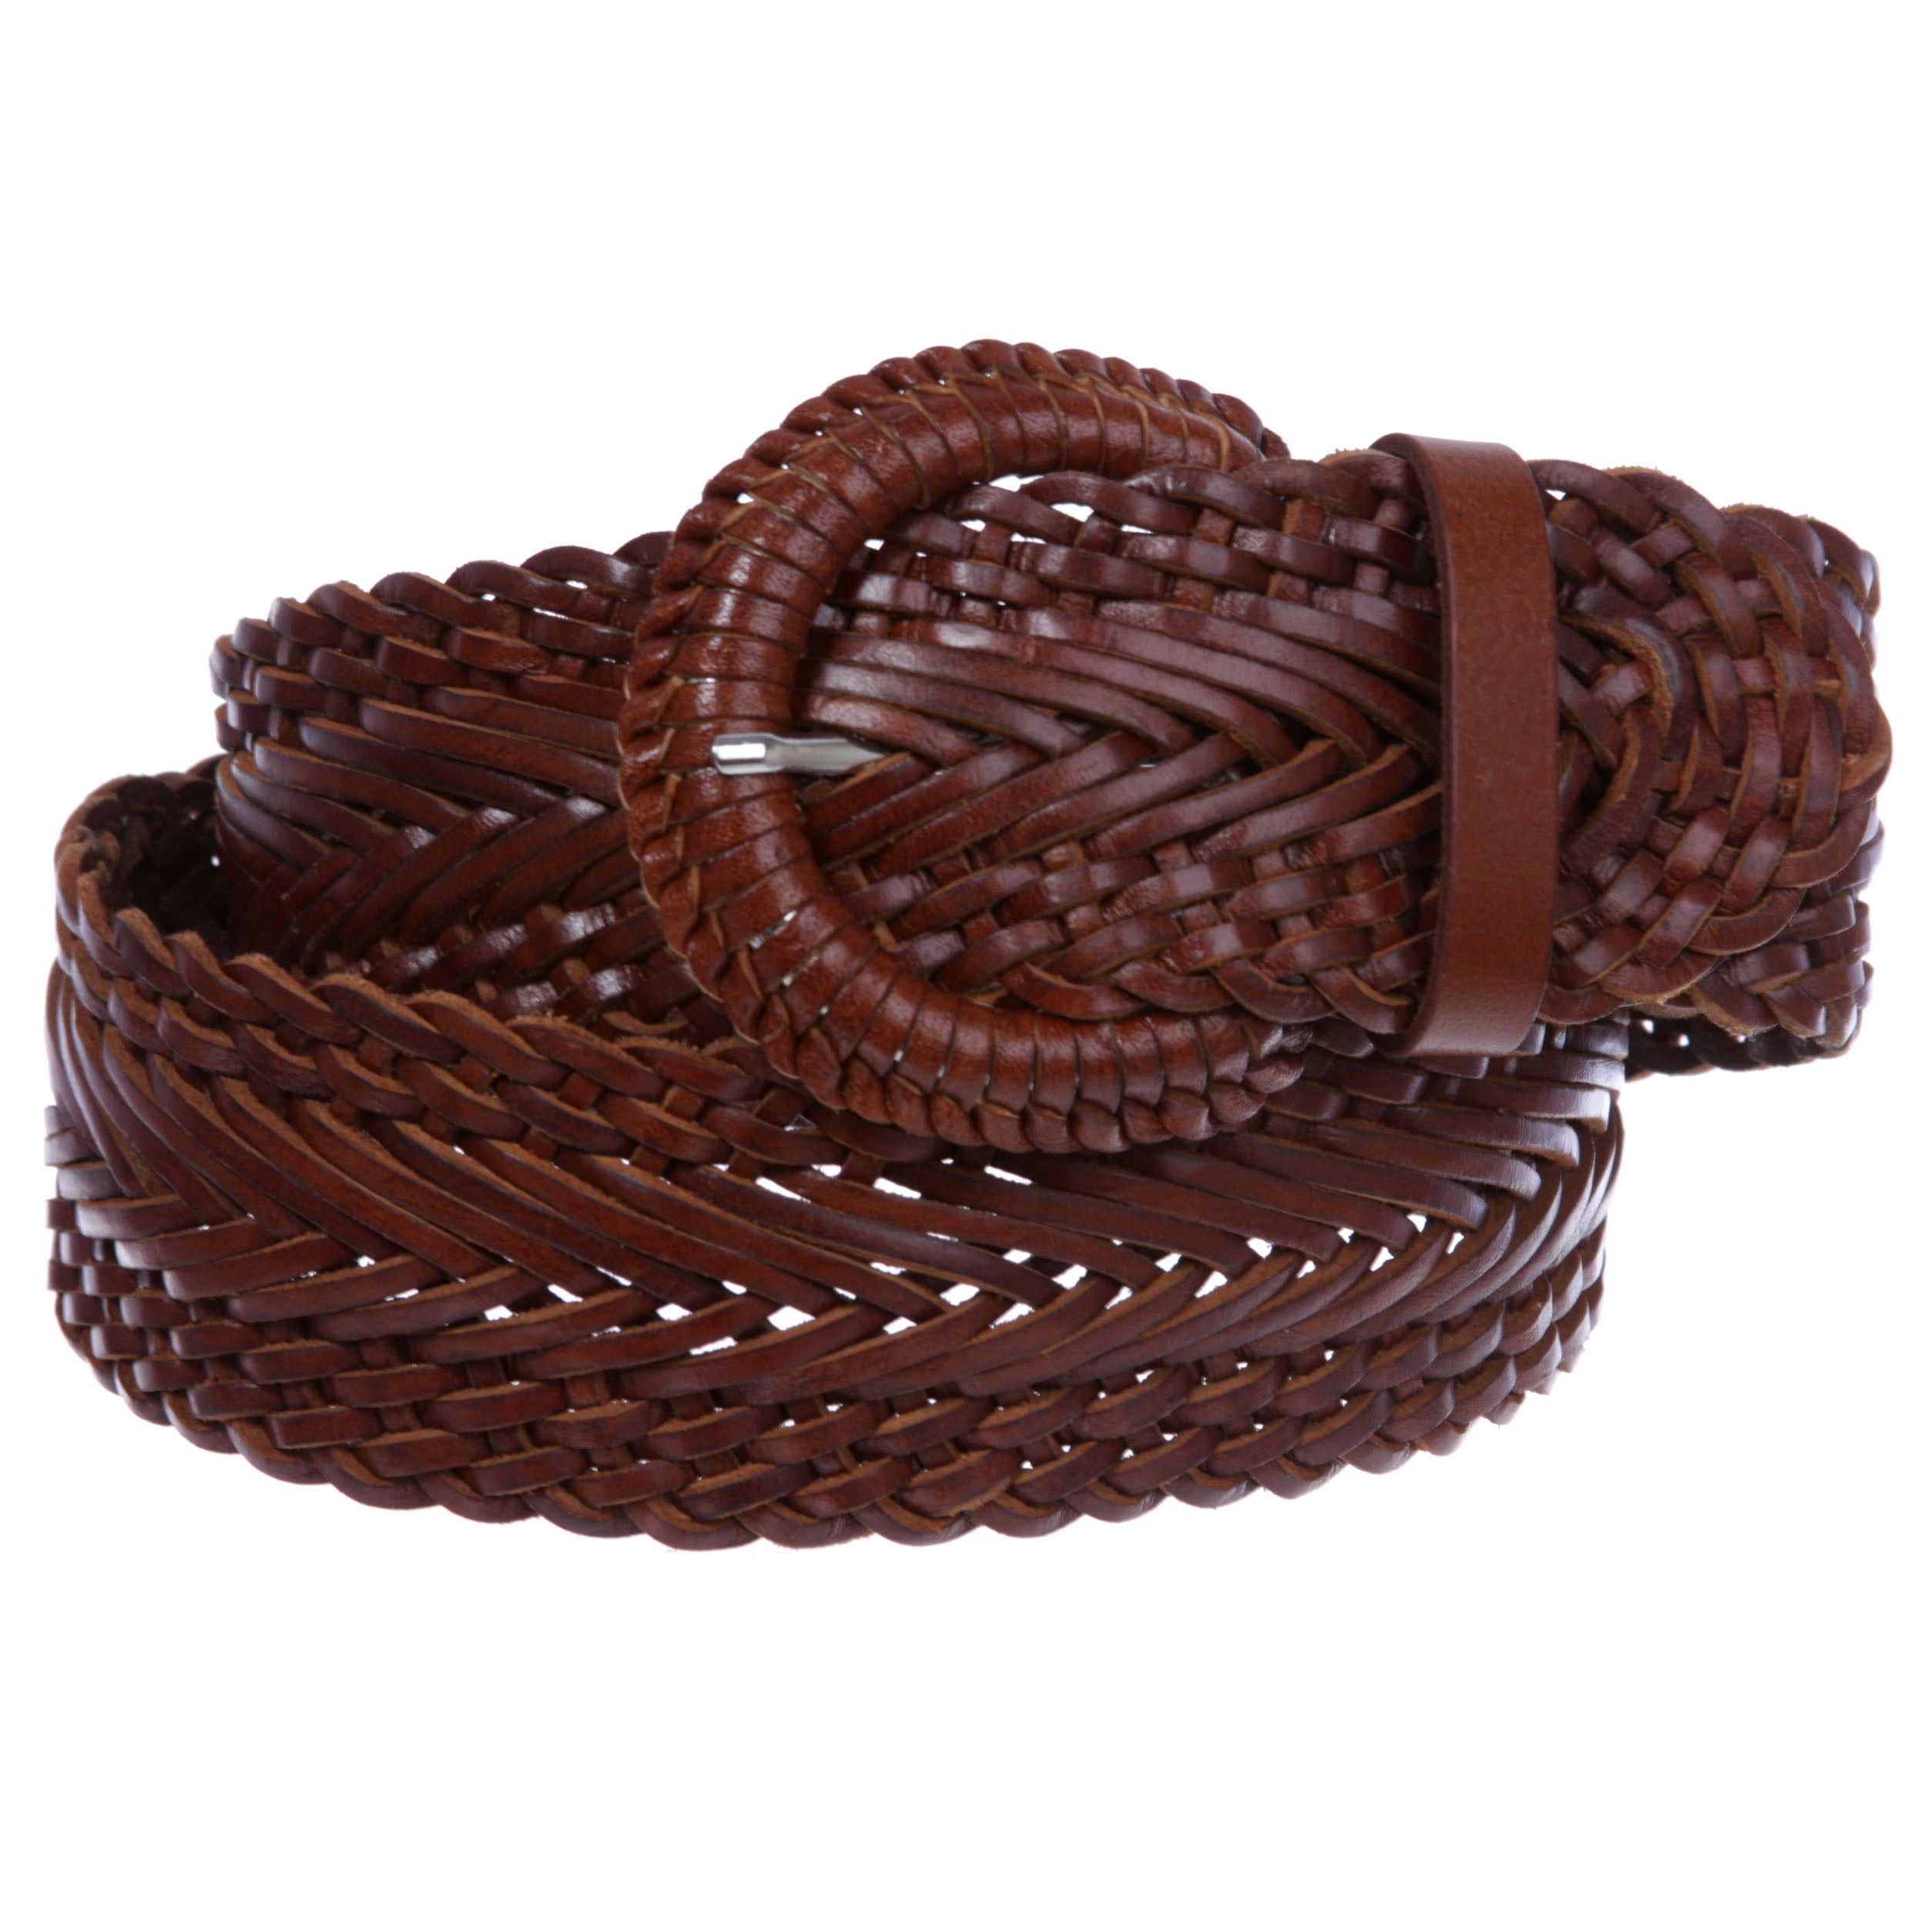 Women's 2 Wide Braided Woven Round Leather Belt 